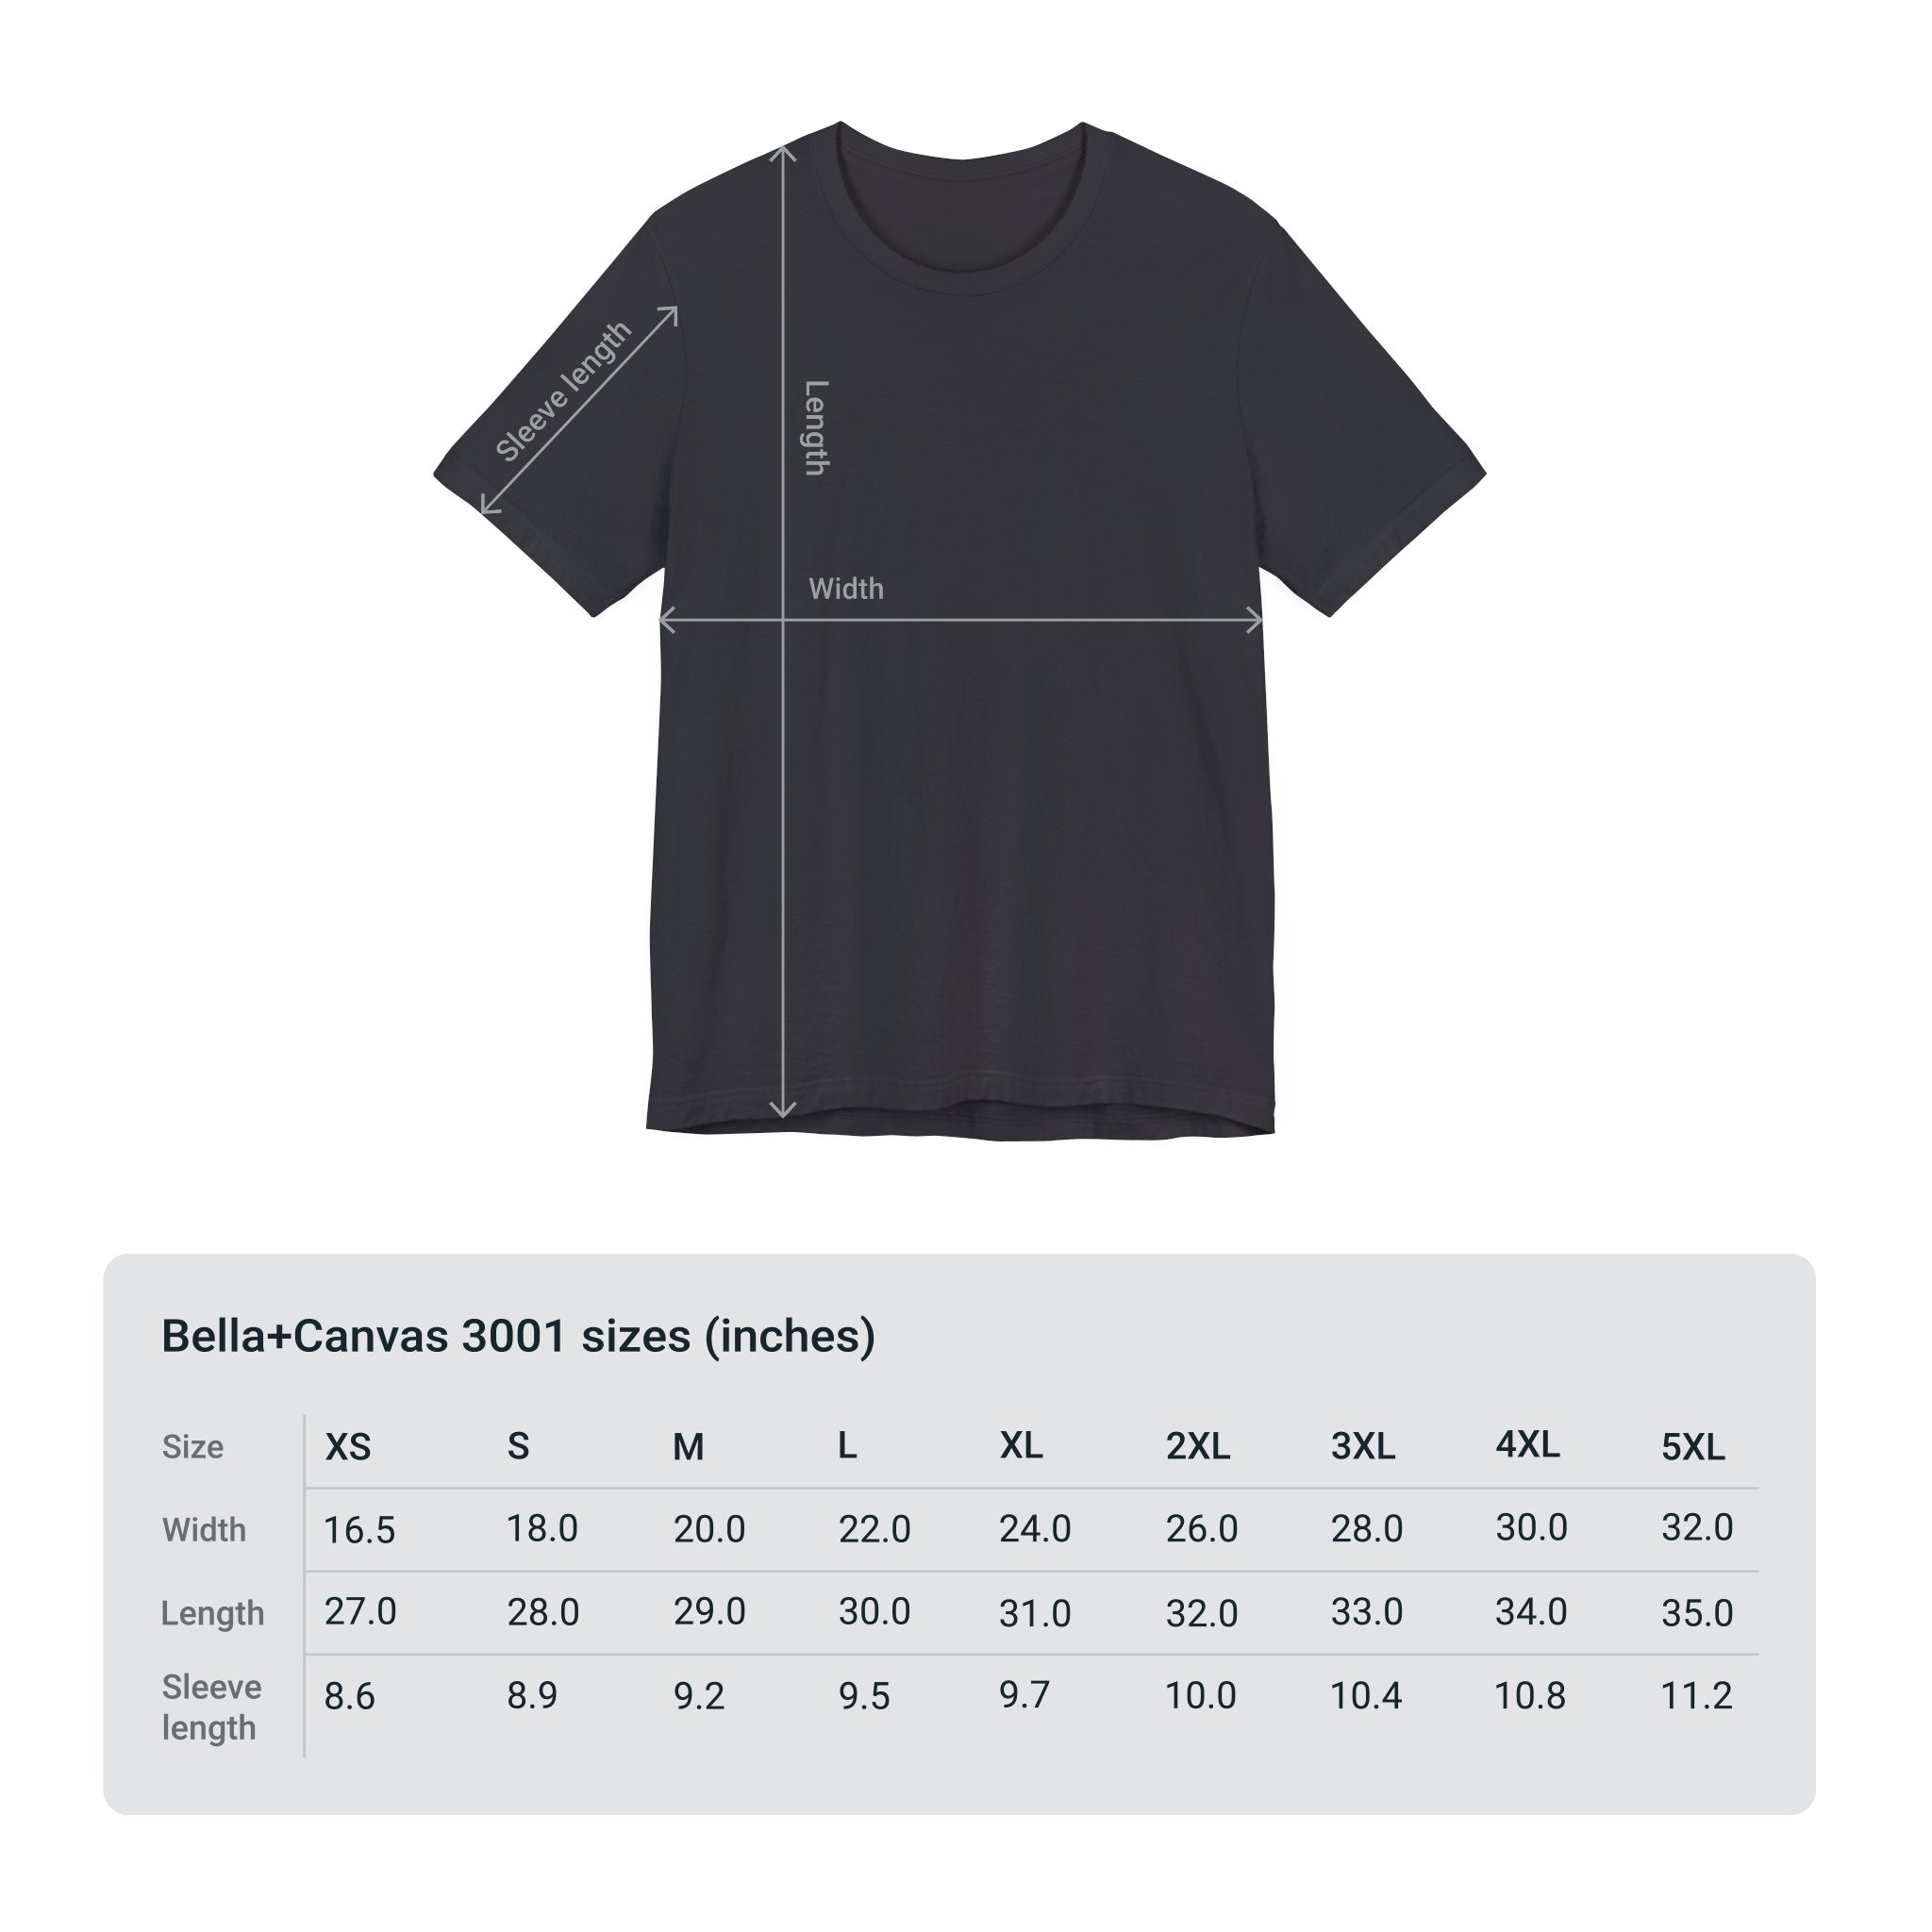 Adventure Unlimited black t-shirt with size measurements printed - direct-to-garment item